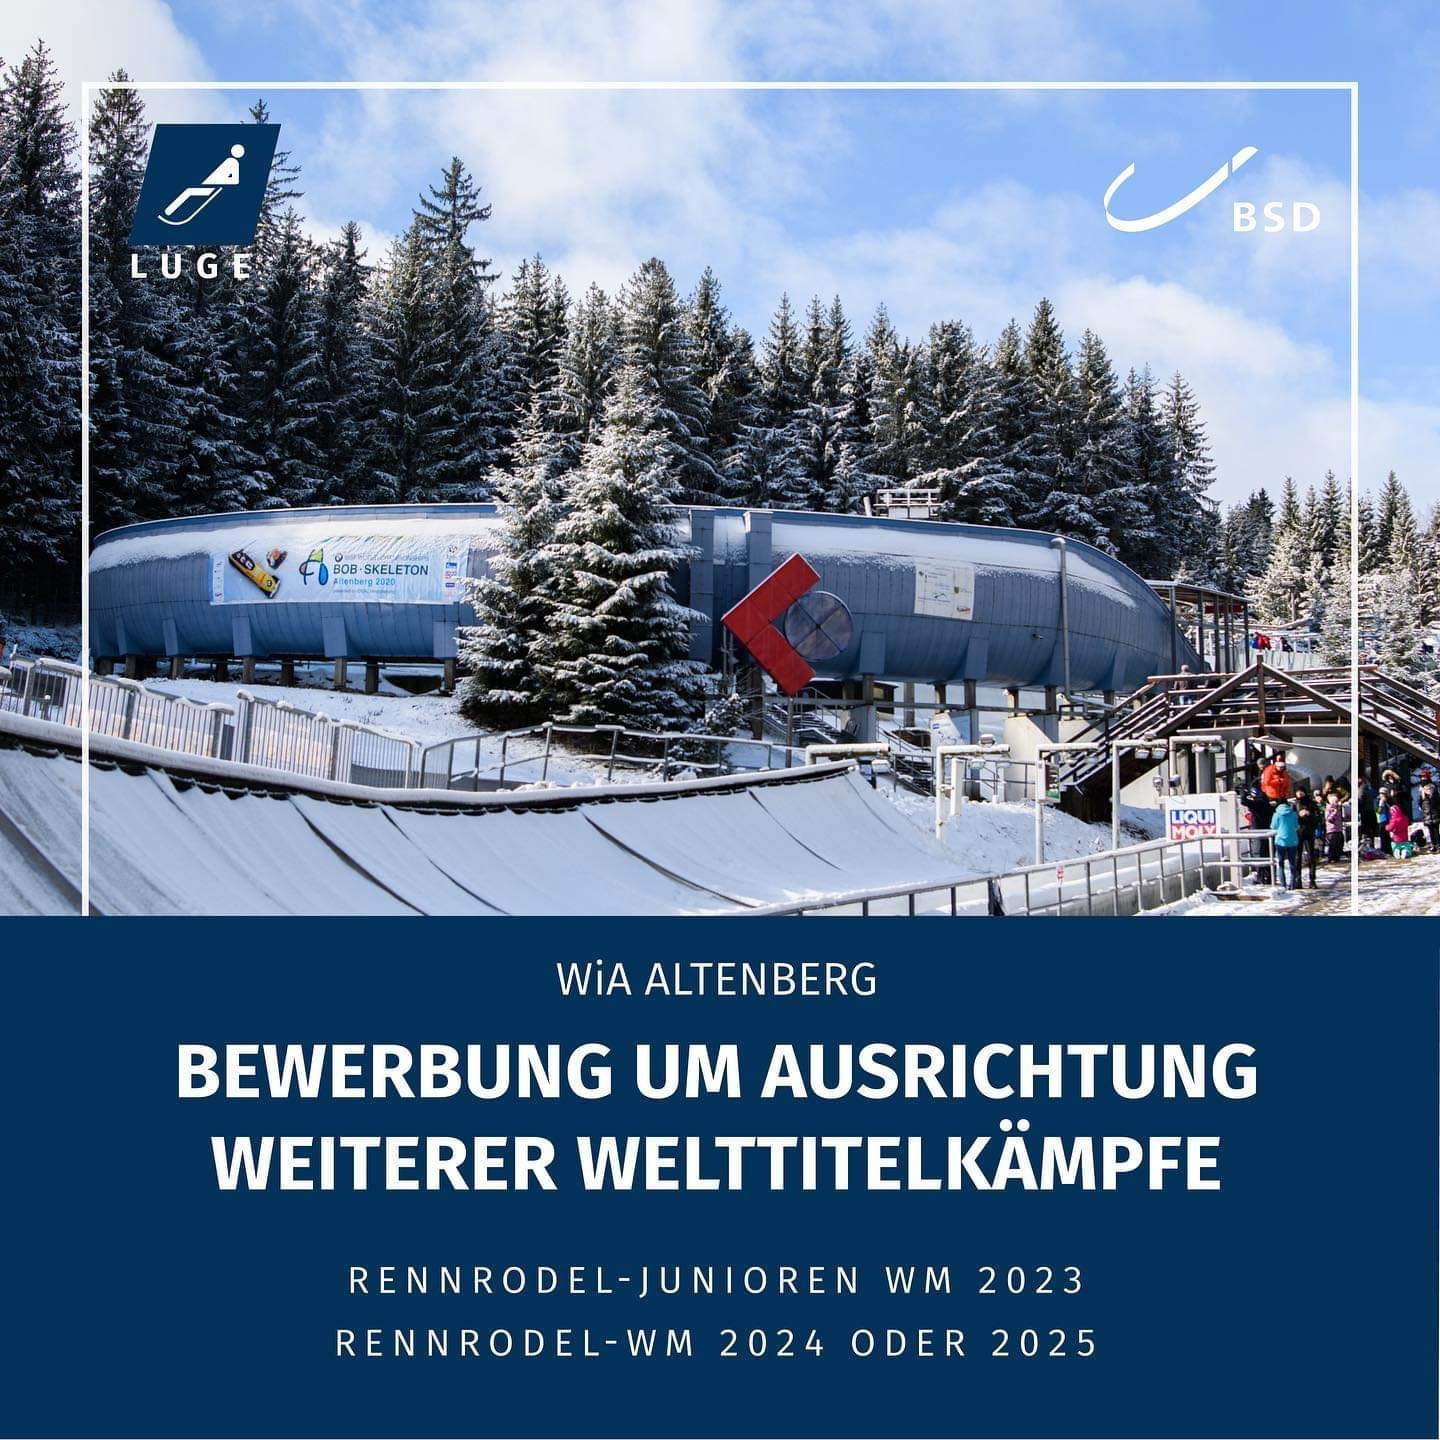 Altenberg to bid for Luge World Championships in 2024 or 2025